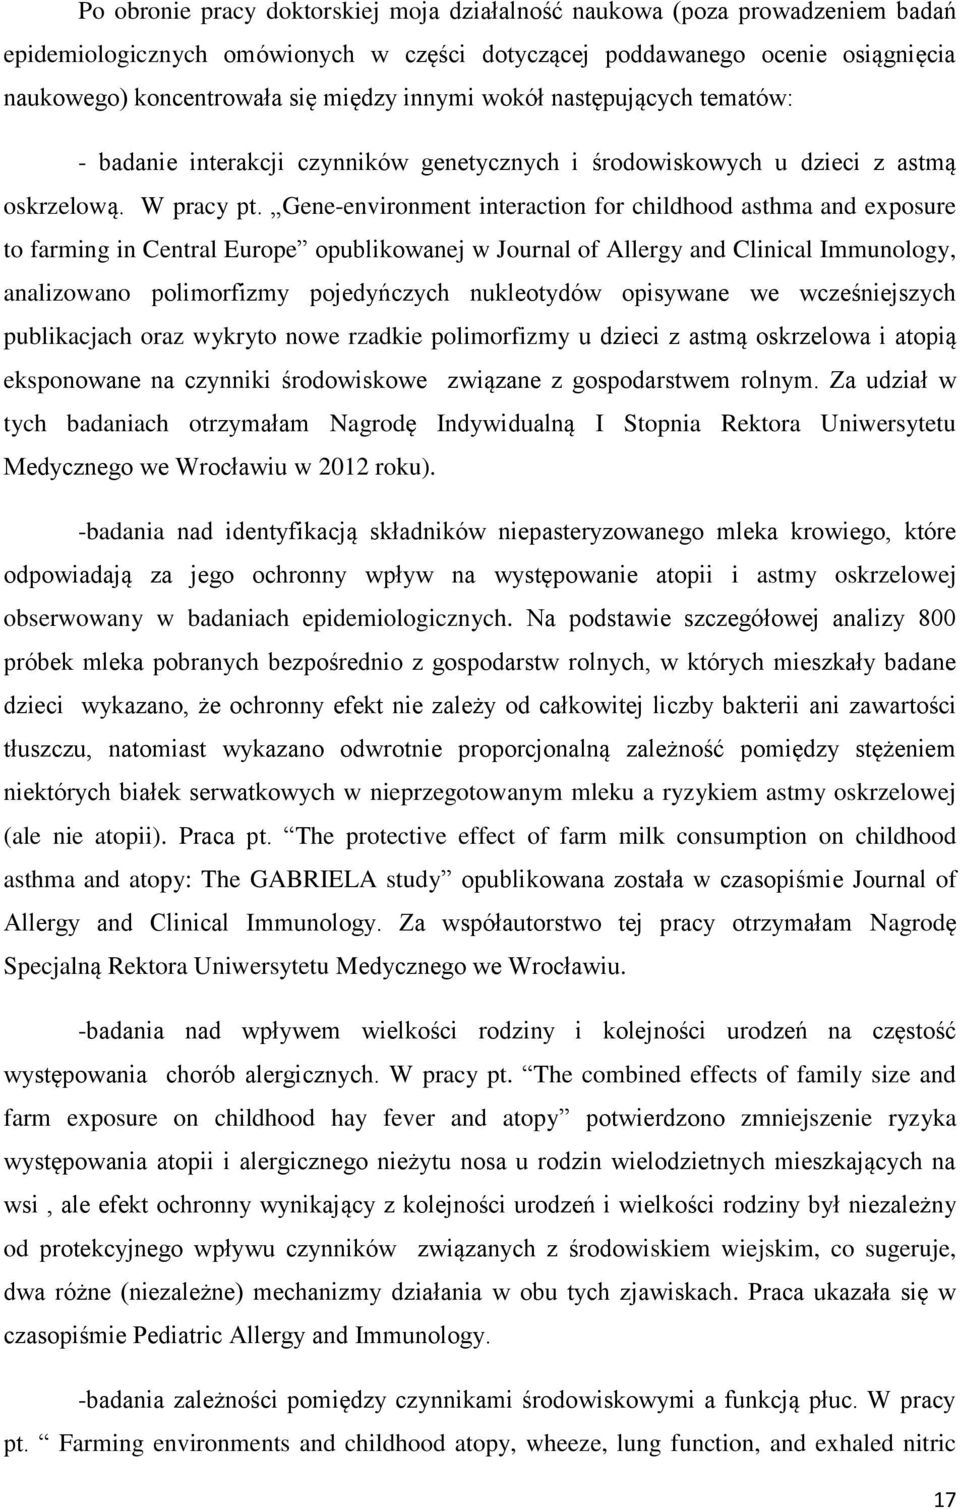 Gene-environment interaction for childhood asthma and exposure to farming in Central Europe opublikowanej w Journal of Allergy and Clinical Immunology, analizowano polimorfizmy pojedyńczych